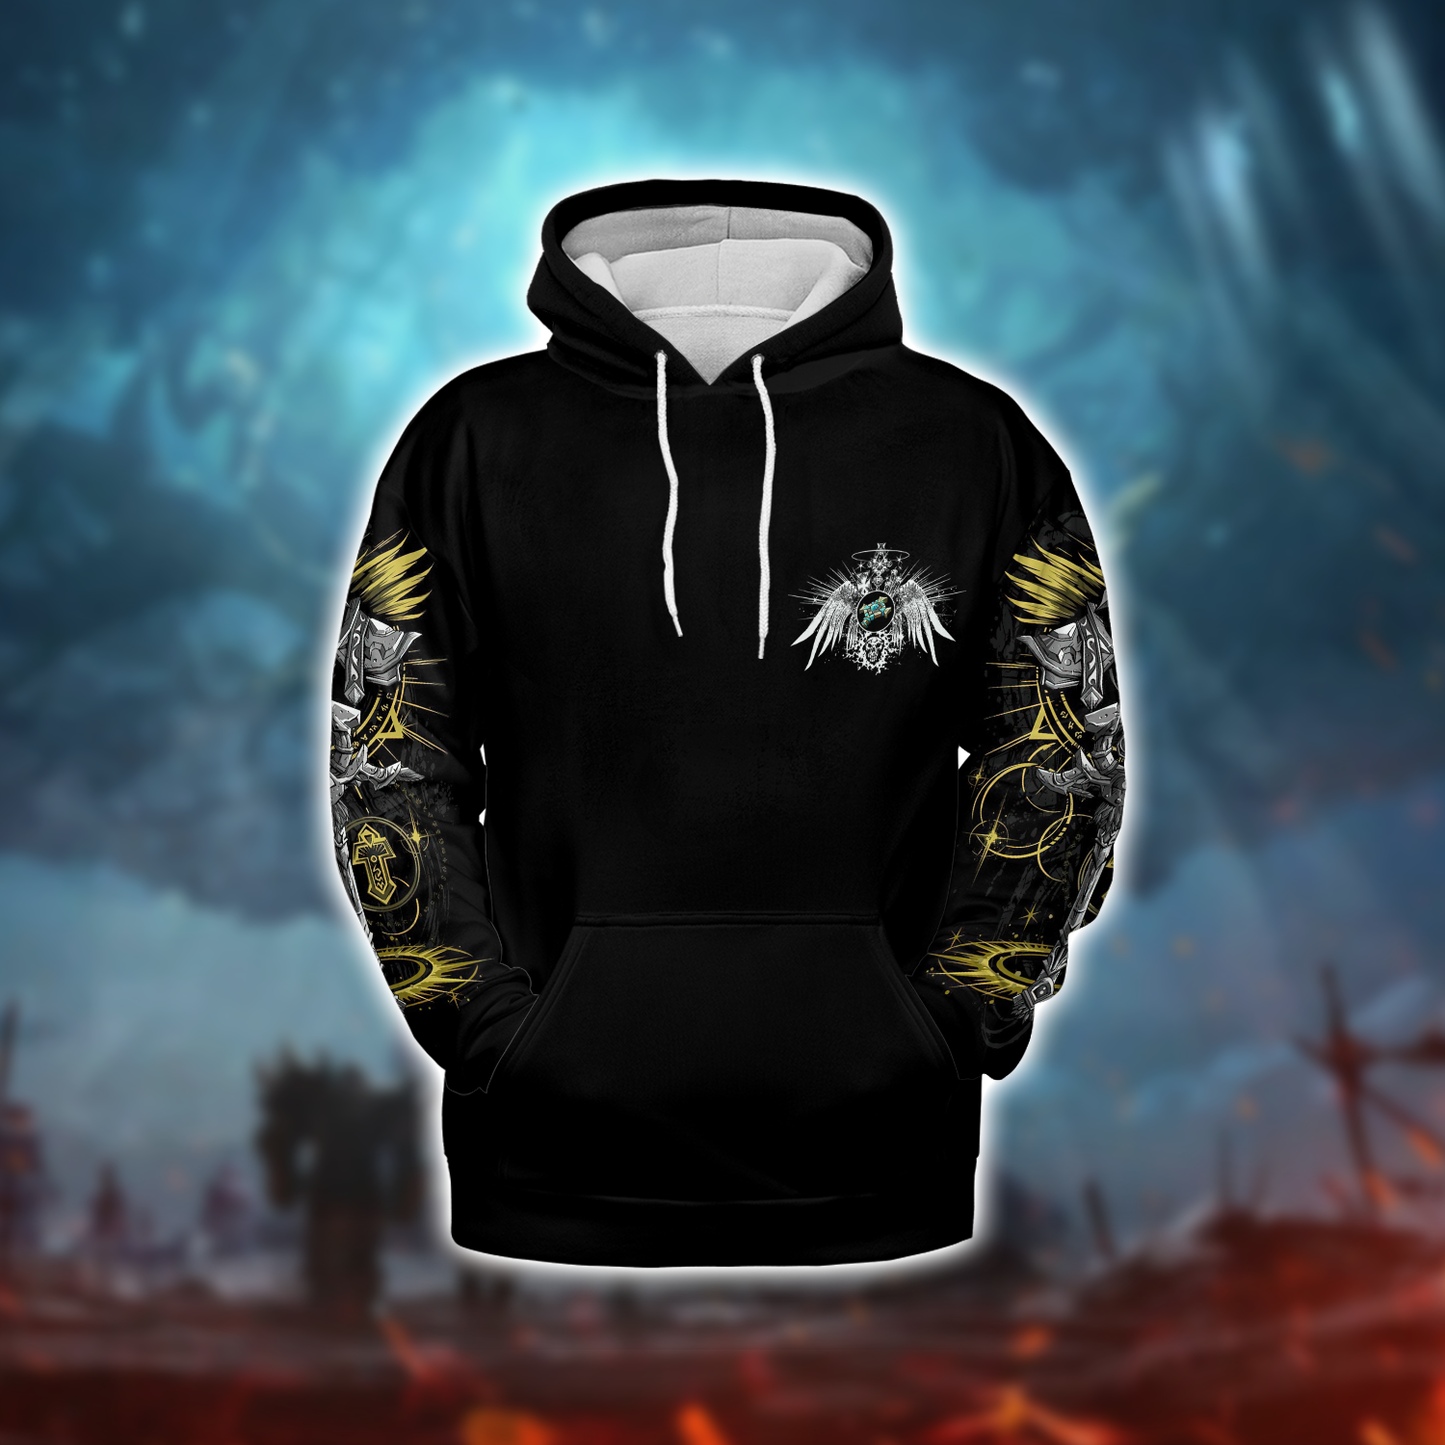 Holy Priest WoW Class Guide V1 AOP Hoodie